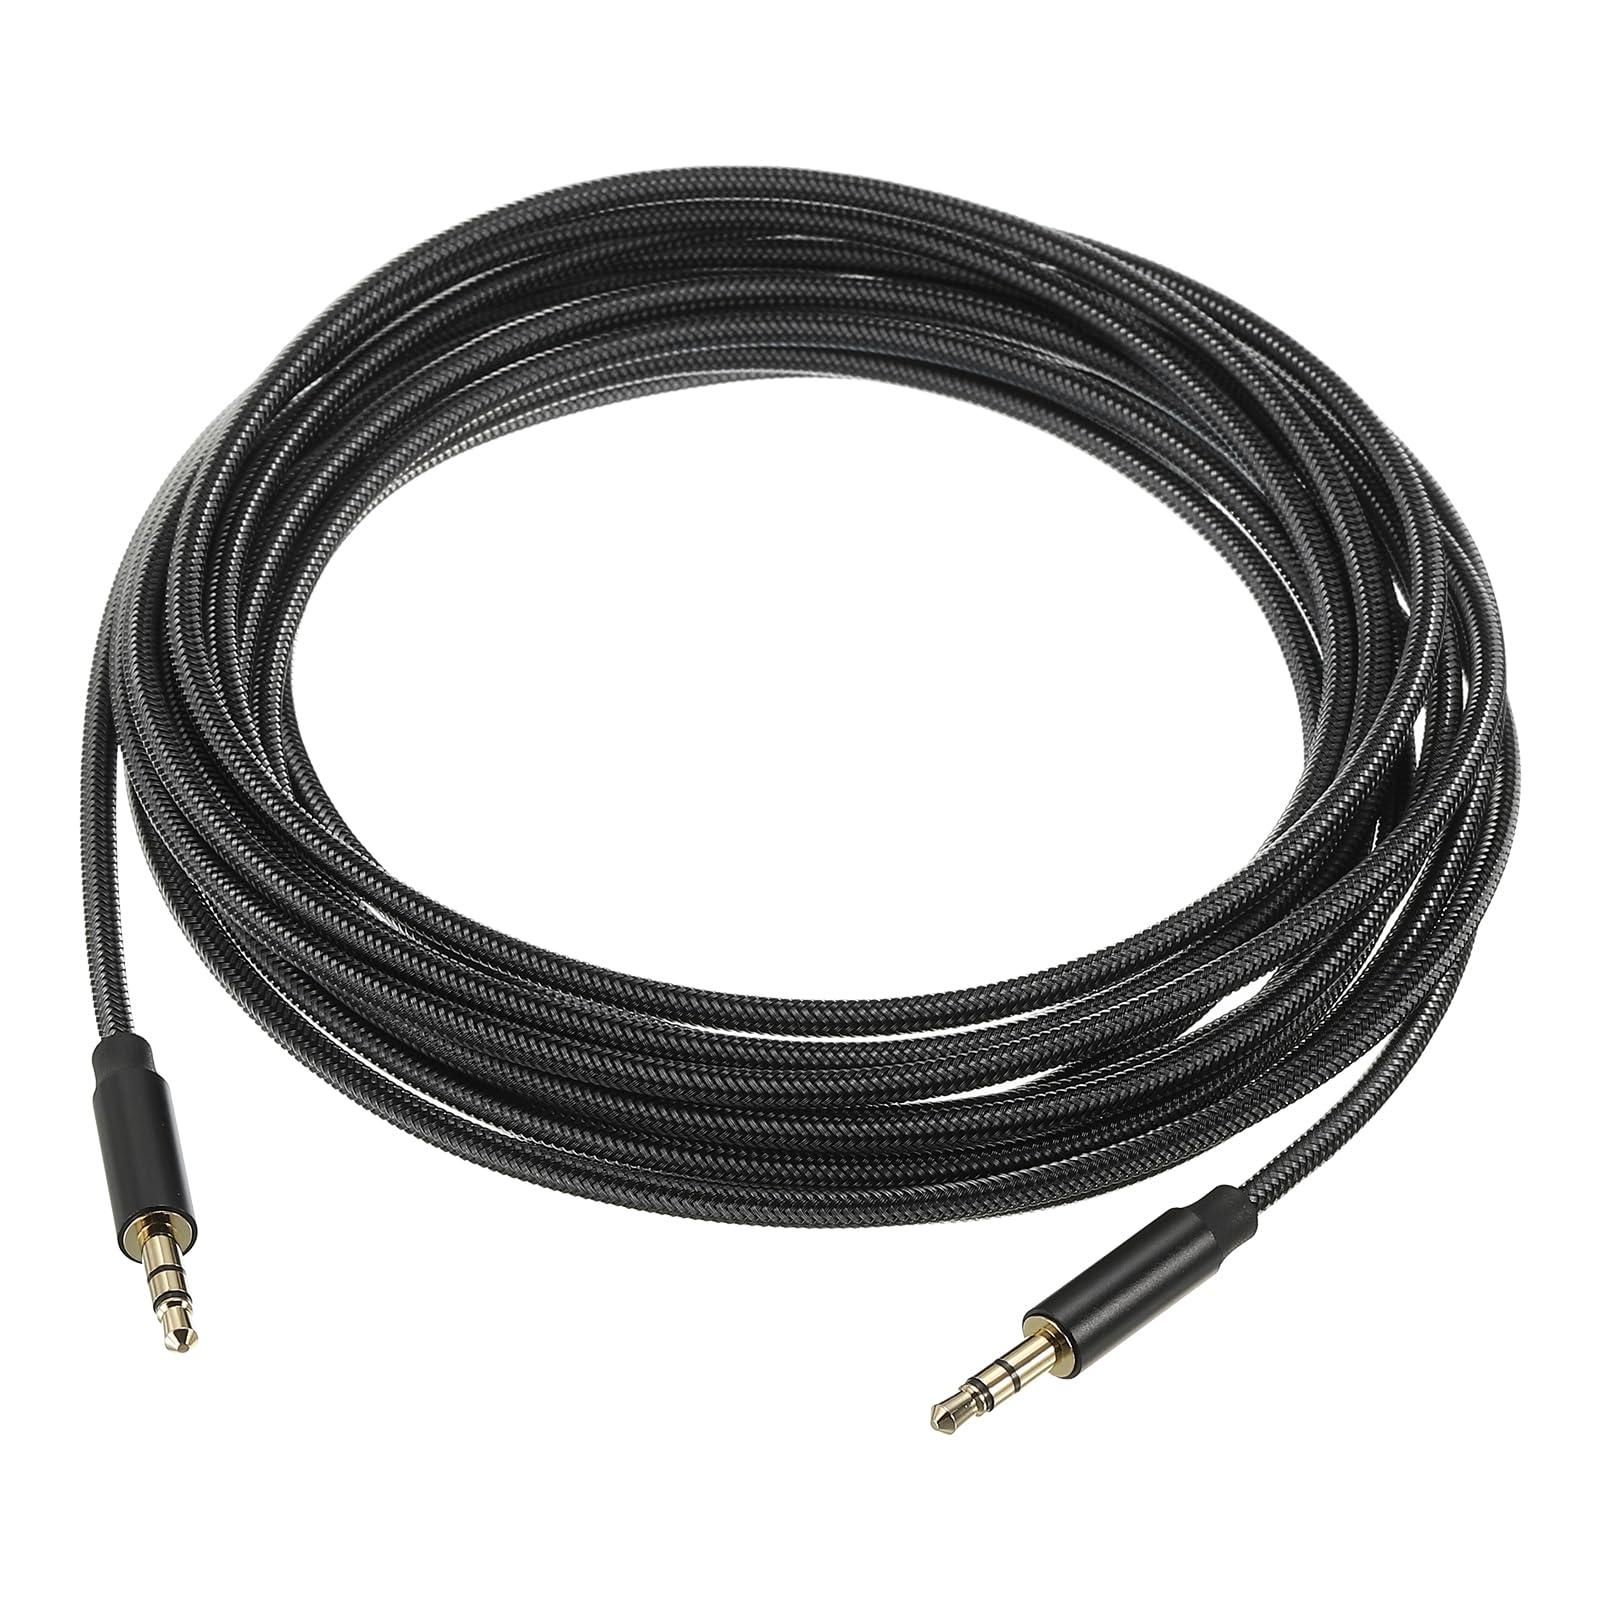 sourcing map 3.5mm Aux Cable Male to Male Auxiliary Audio Cable HiFi Headphone Cord 16ft Nylon Braided for Phone Headphone Speaker Stereo, Black